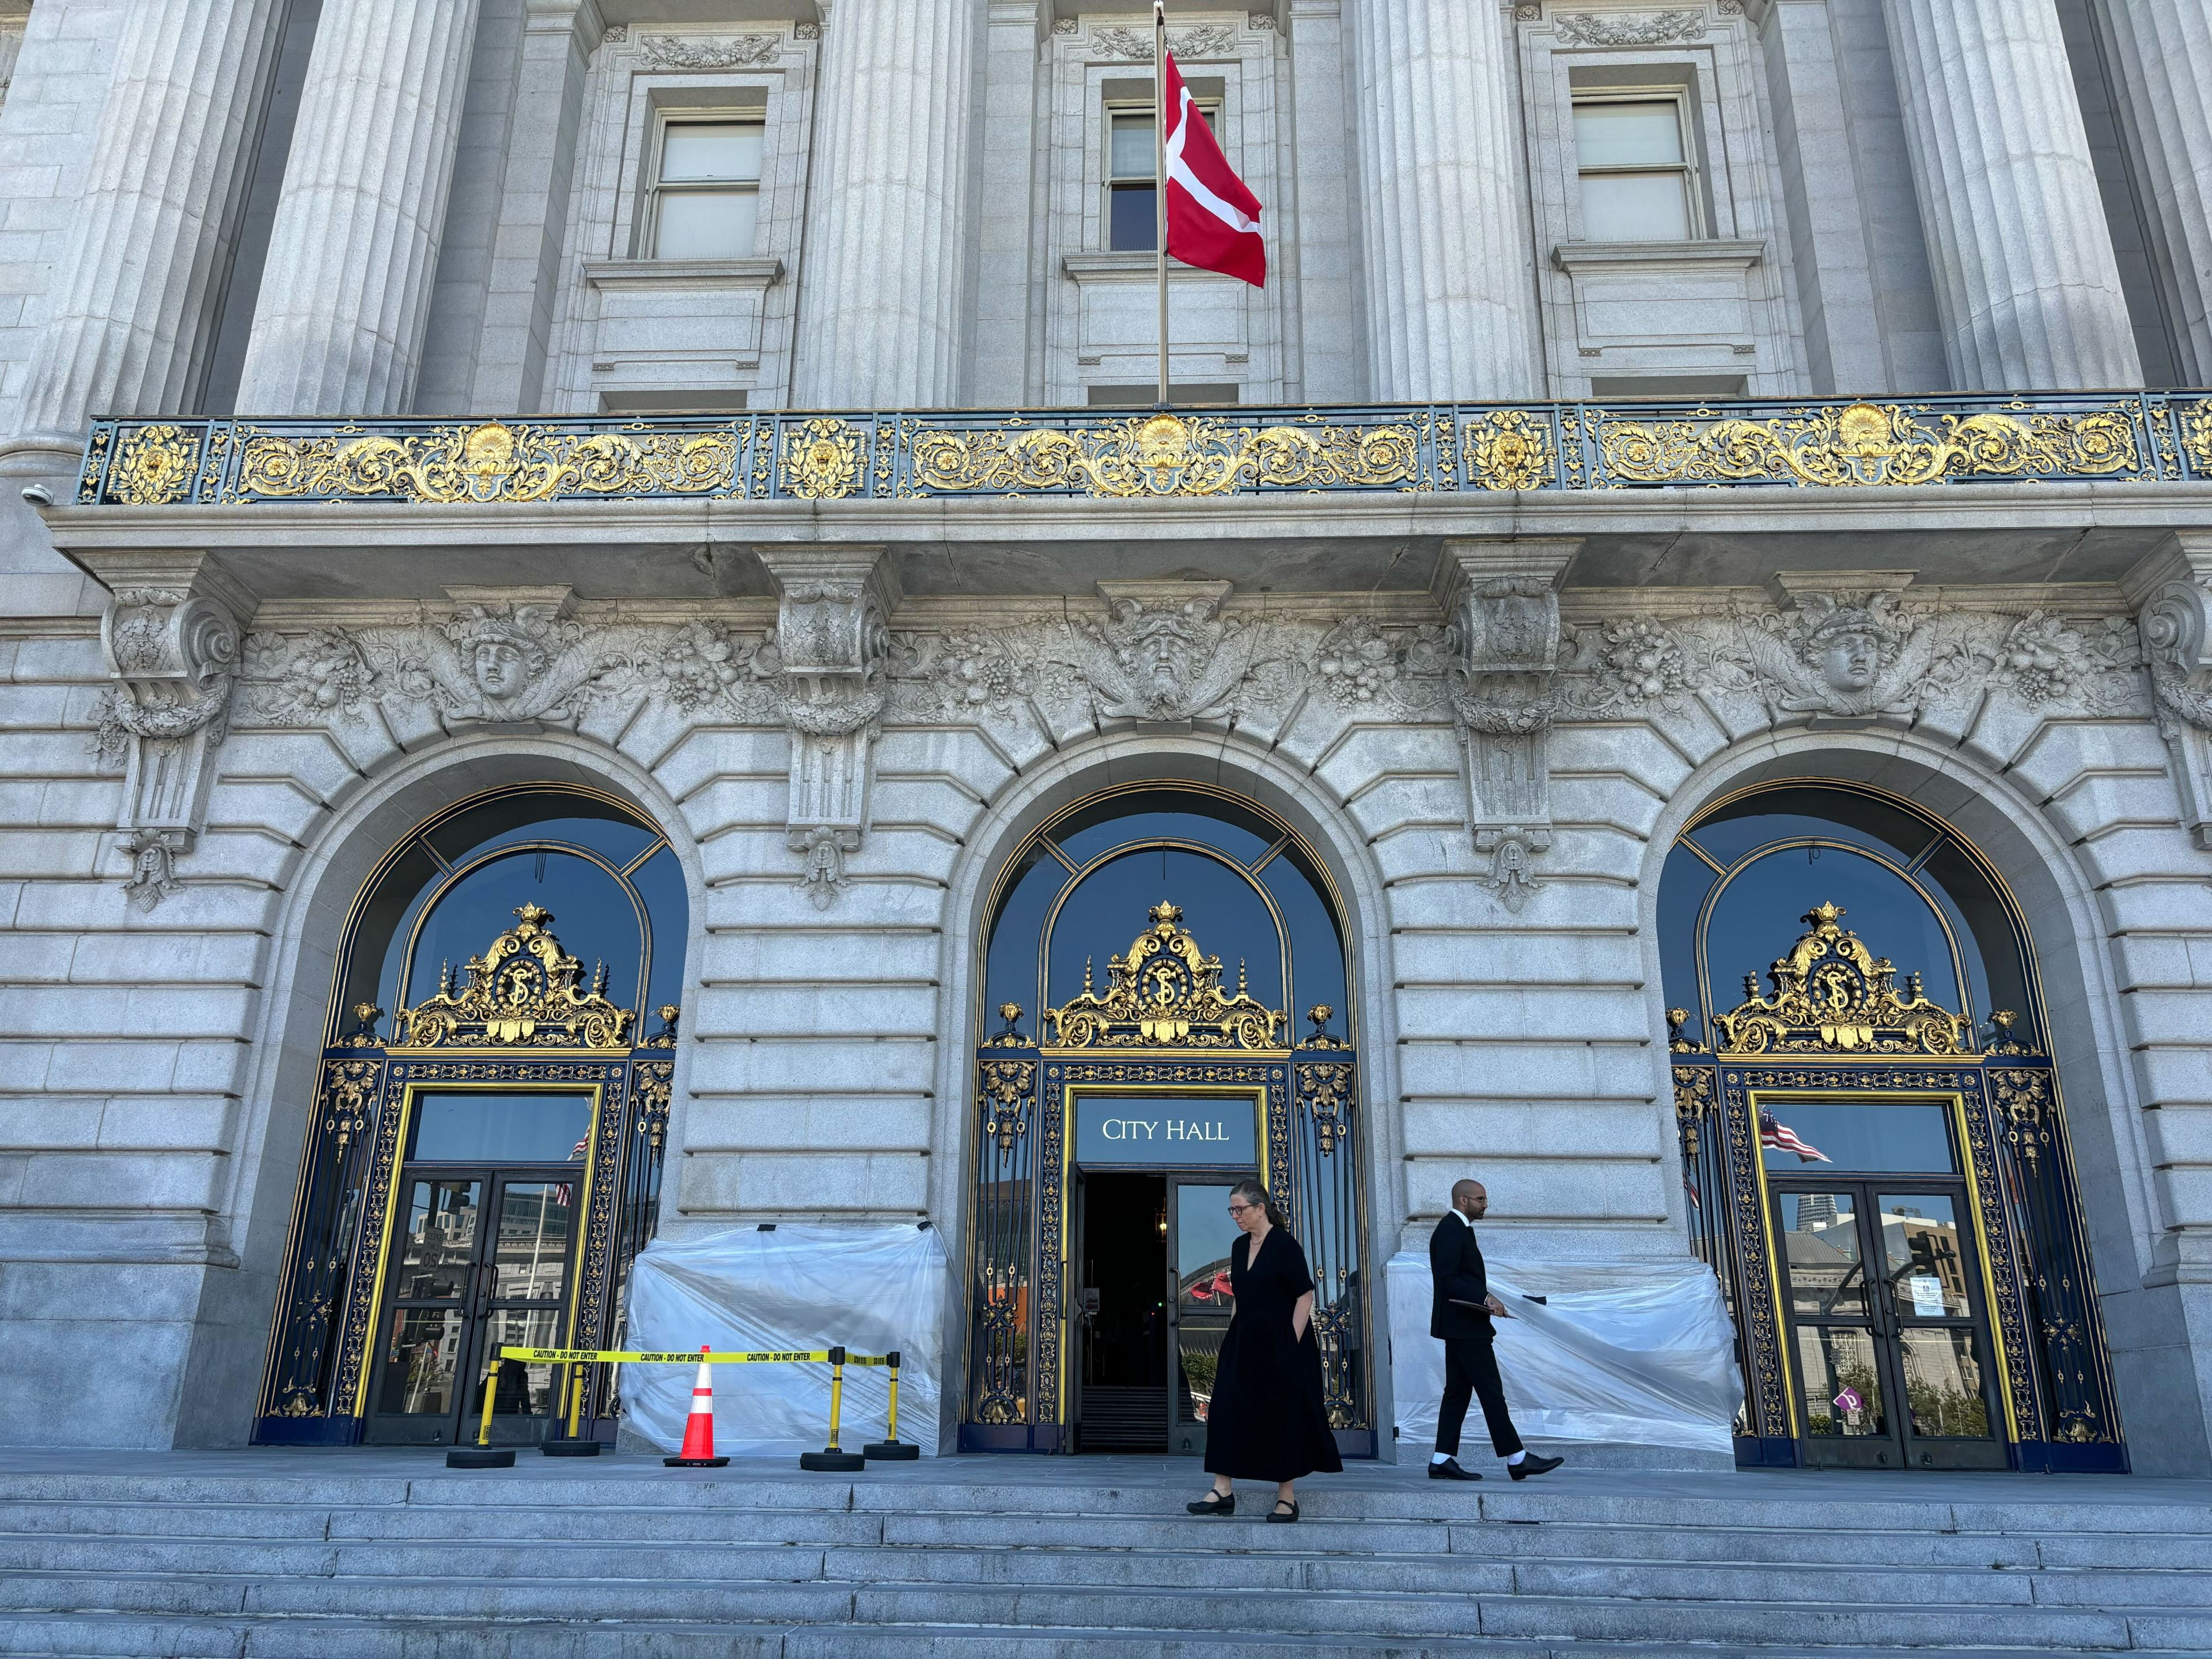 The image shows an ornate building facade with tall columns and gold detailing on arched doors. &quot;City Hall&quot; is written above the center door. Two people walk past.